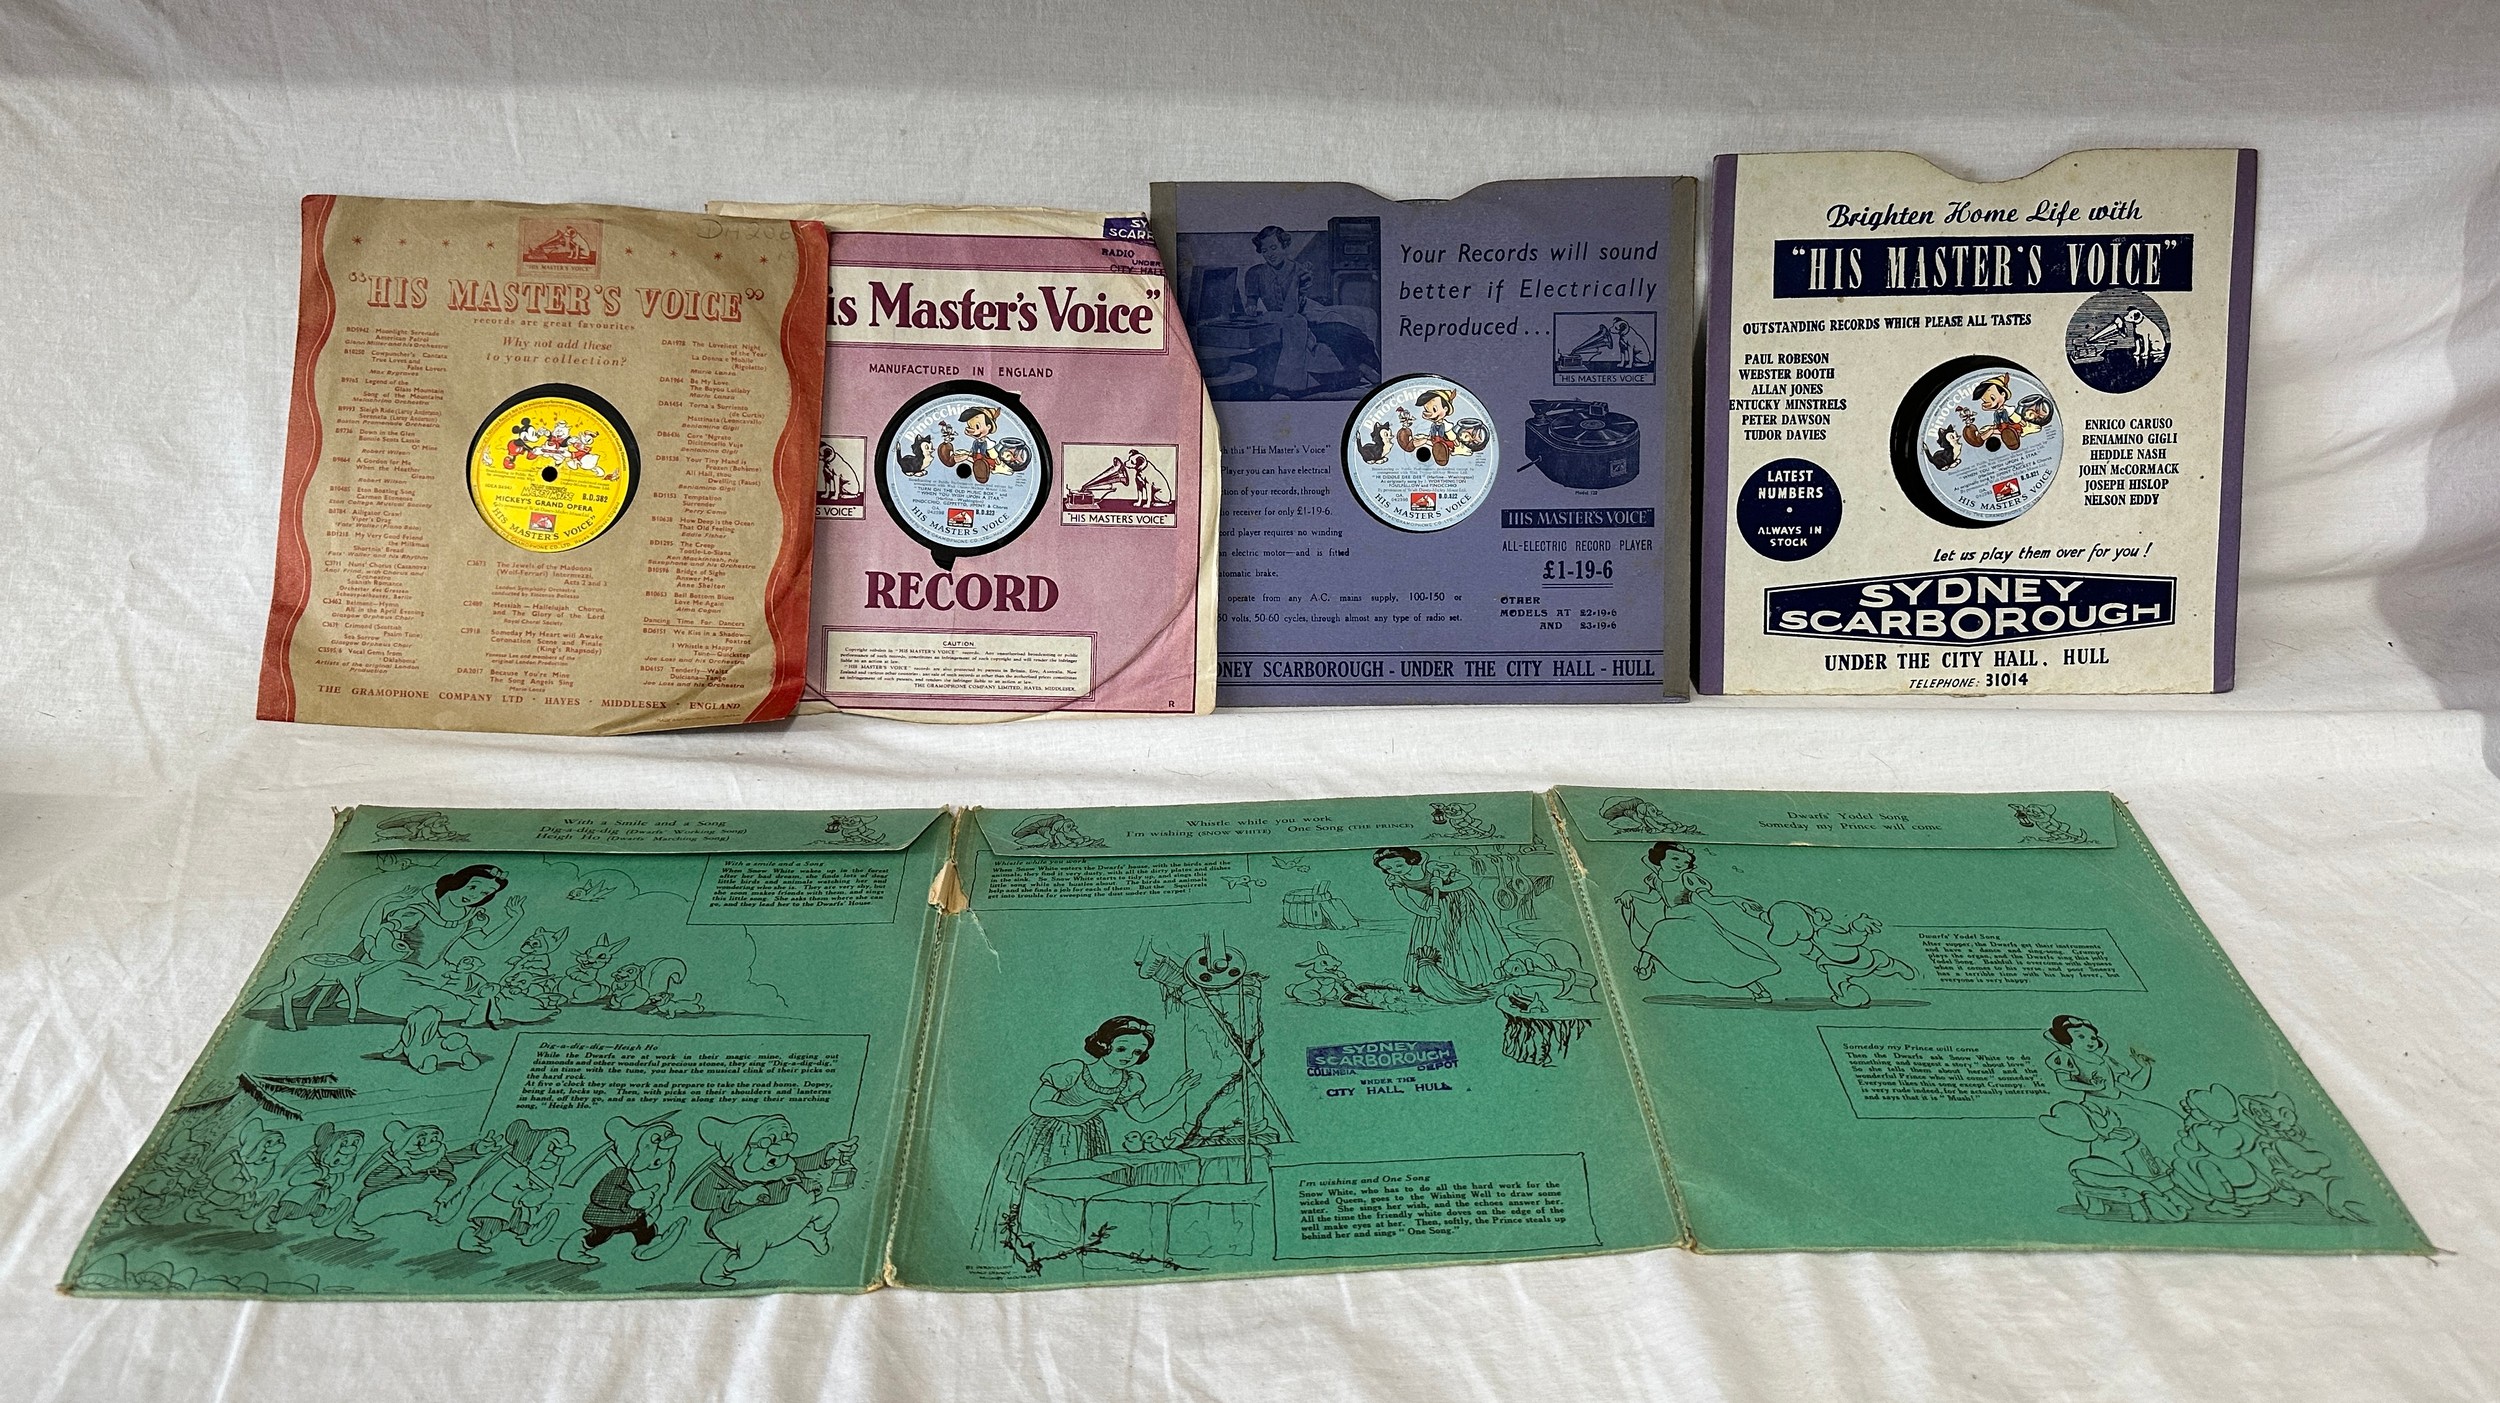 A collection of Disney 'His Master's Voice' records to include 3x Snow White, 3x Pinocchio and one